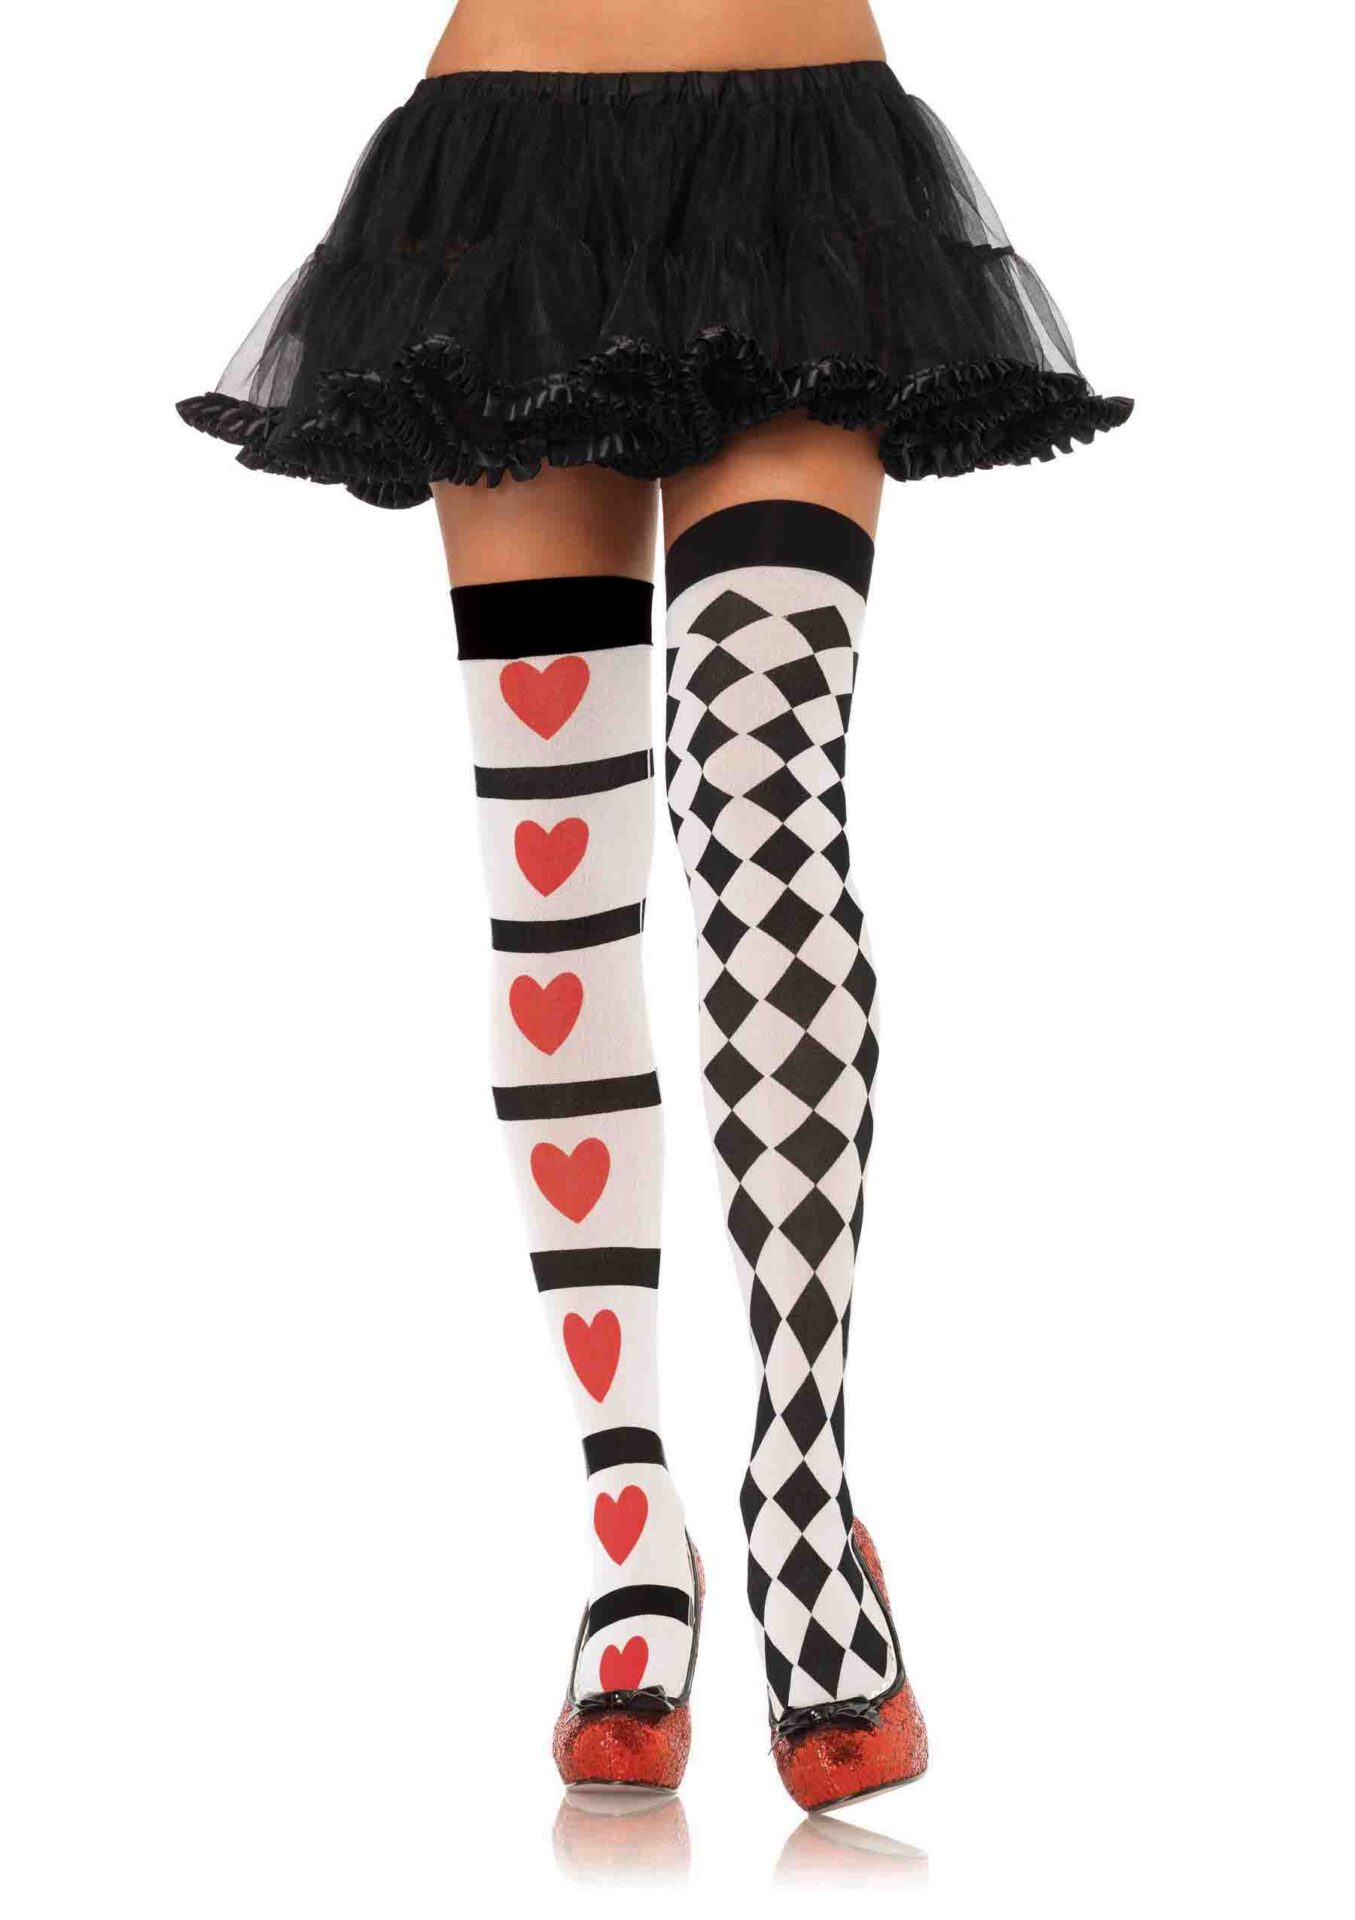 Harlequin and heart thigh high